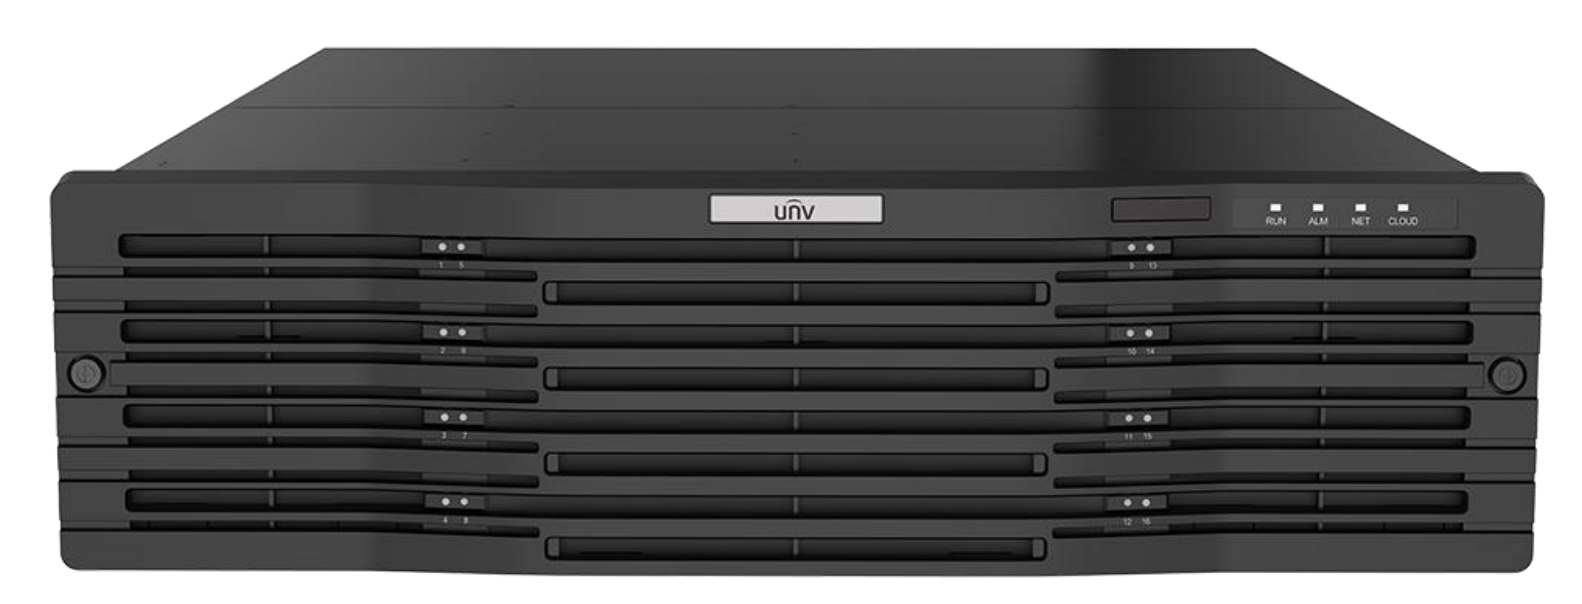 UNIVIEW PRO SERIES 64CH NVR UPTO 16MP 640Mbps INPUT 16x SATA HDD PORT UP TO 16TB EACH 240VAC